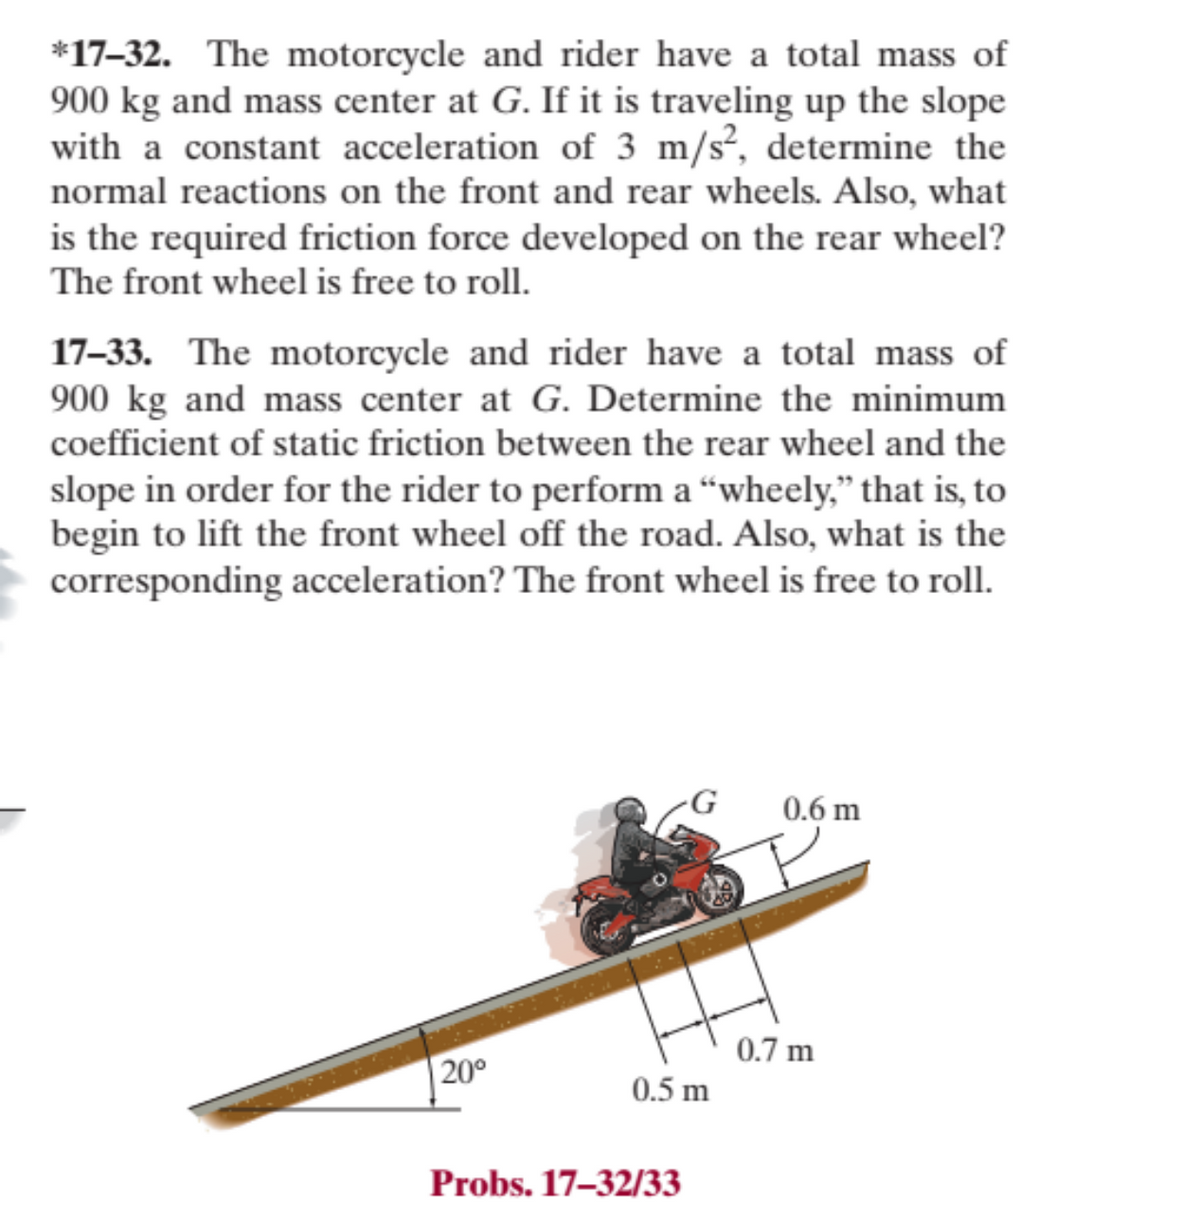 *17-32. The motorcycle and rider have a total mass of
900 kg and mass center at G. If it is traveling up the slope
with a constant acceleration of 3 m/s², determine the
normal reactions on the front and rear wheels. Also, what
is the required friction force developed on the rear wheel?
The front wheel is free to roll.
17-33. The motorcycle and rider have a total mass of
900 kg and mass center at G. Determine the minimum
coefficient of static friction between the rear wheel and the
slope in order for the rider to perform a "wheely," that is, to
begin to lift the front wheel off the road. Also, what is the
corresponding acceleration? The front wheel is free to roll.
20⁰
G
0.5 m
Probs. 17-32/33
0.6 m
0.7 m